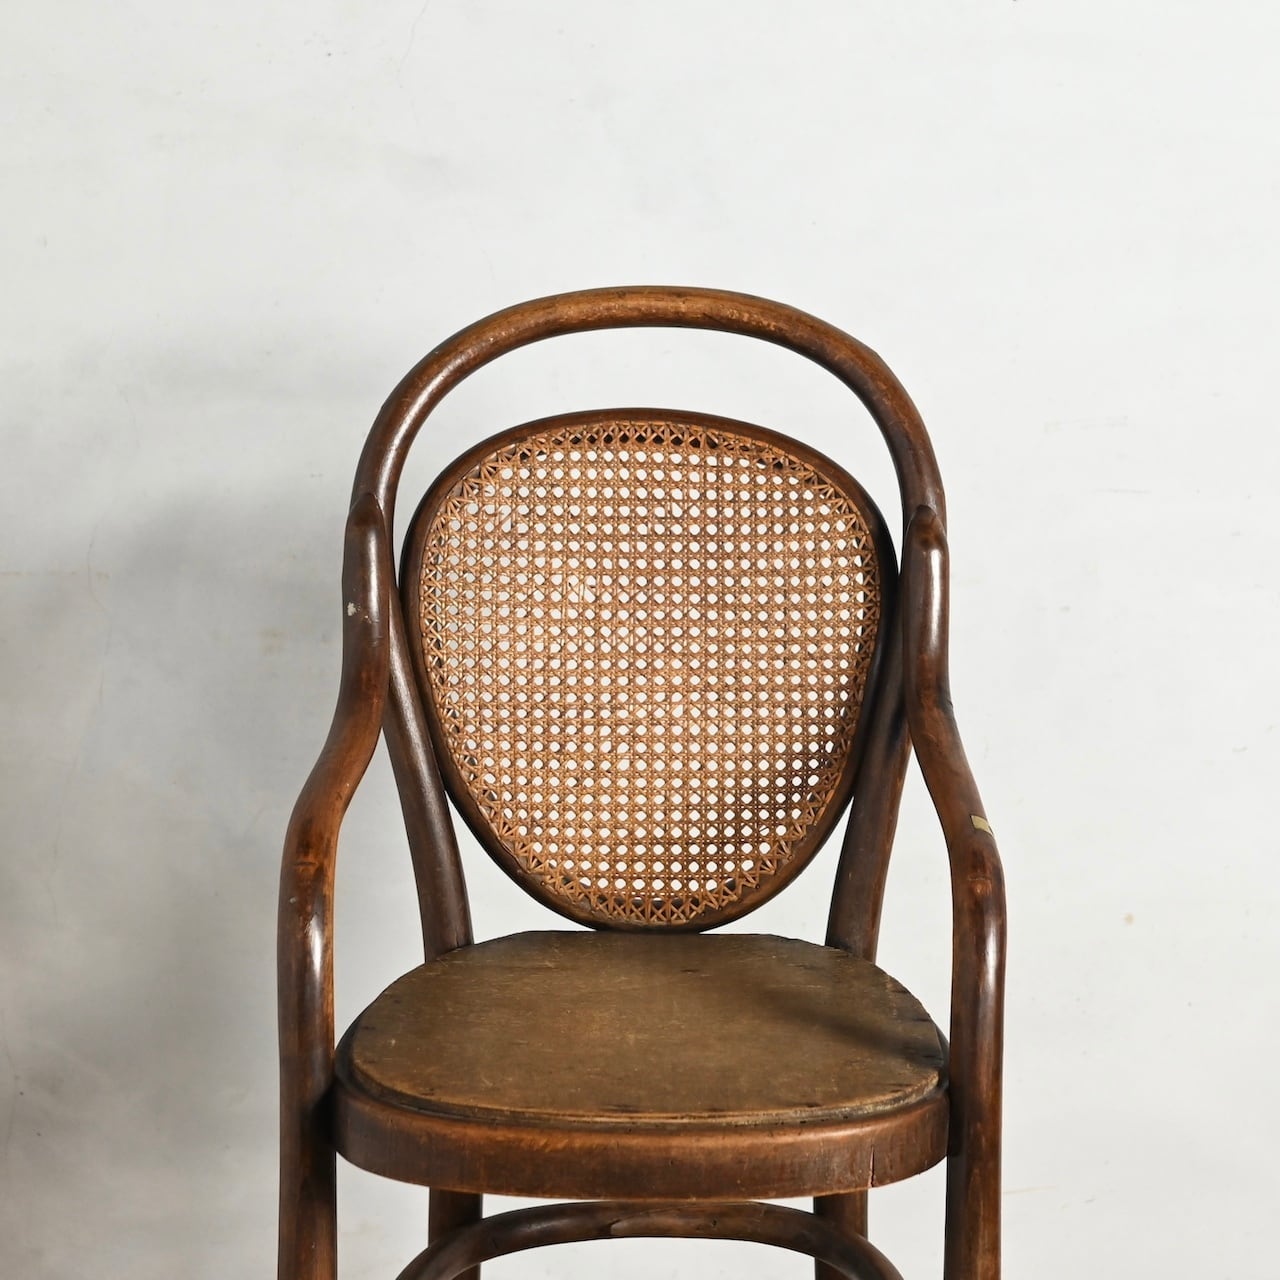 Kids Bentwood Chair / キッズ ベントウッド  チェア〈ドールチェア・ベビーチェア・子供椅子・アンティーク・ヴィンテージ〉113050 | SHABBY'S MARKETPLACE　 アンティーク・ヴィンテージ 家具や雑貨のお店 powered by BASE